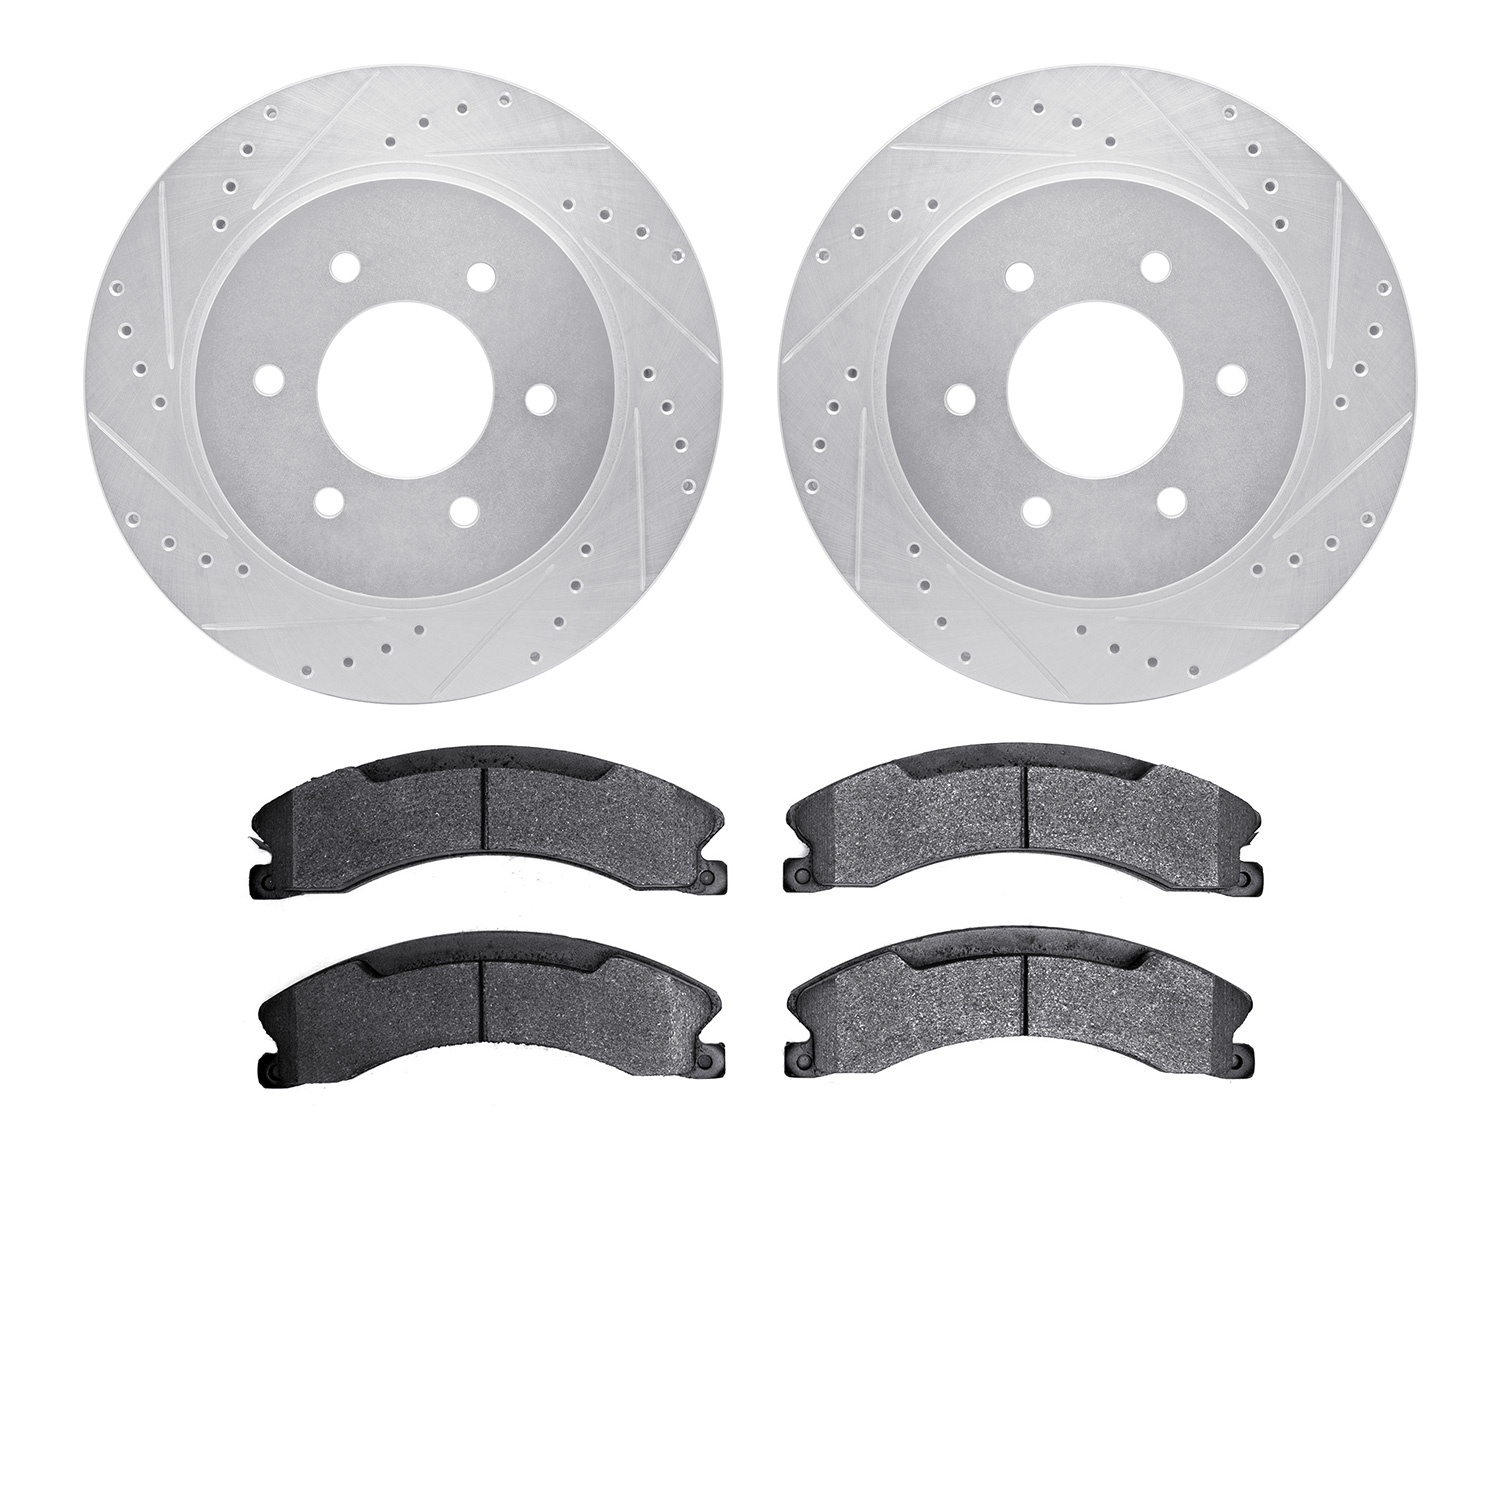 7402-67008 Drilled/Slotted Brake Rotors with Ultimate-Duty Brake Pads Kit [Silver], Fits Select Infiniti/Nissan, Position: Front